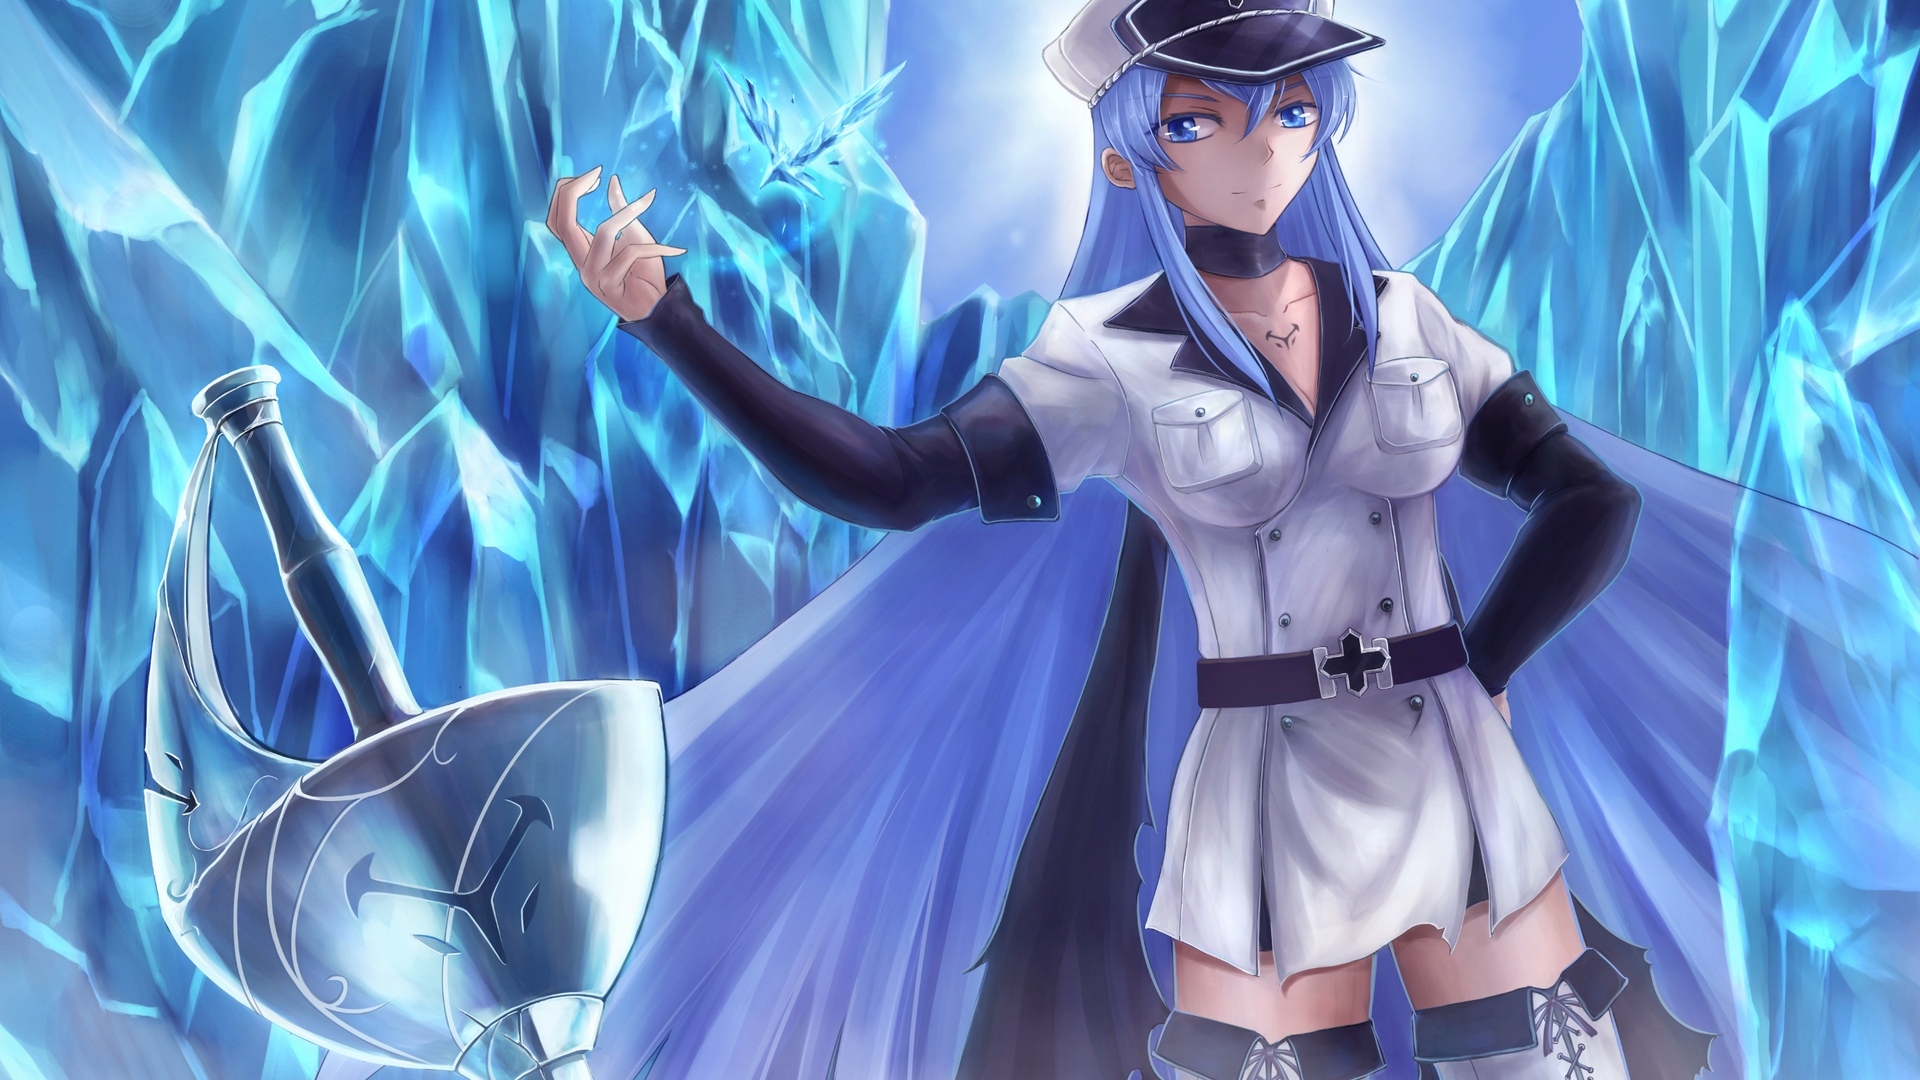 #akame #akamegakill #akamegakillesdeath #esdeath #esdeathakamegakill - Akame Ga Kill Esdeath Hd , HD Wallpaper & Backgrounds